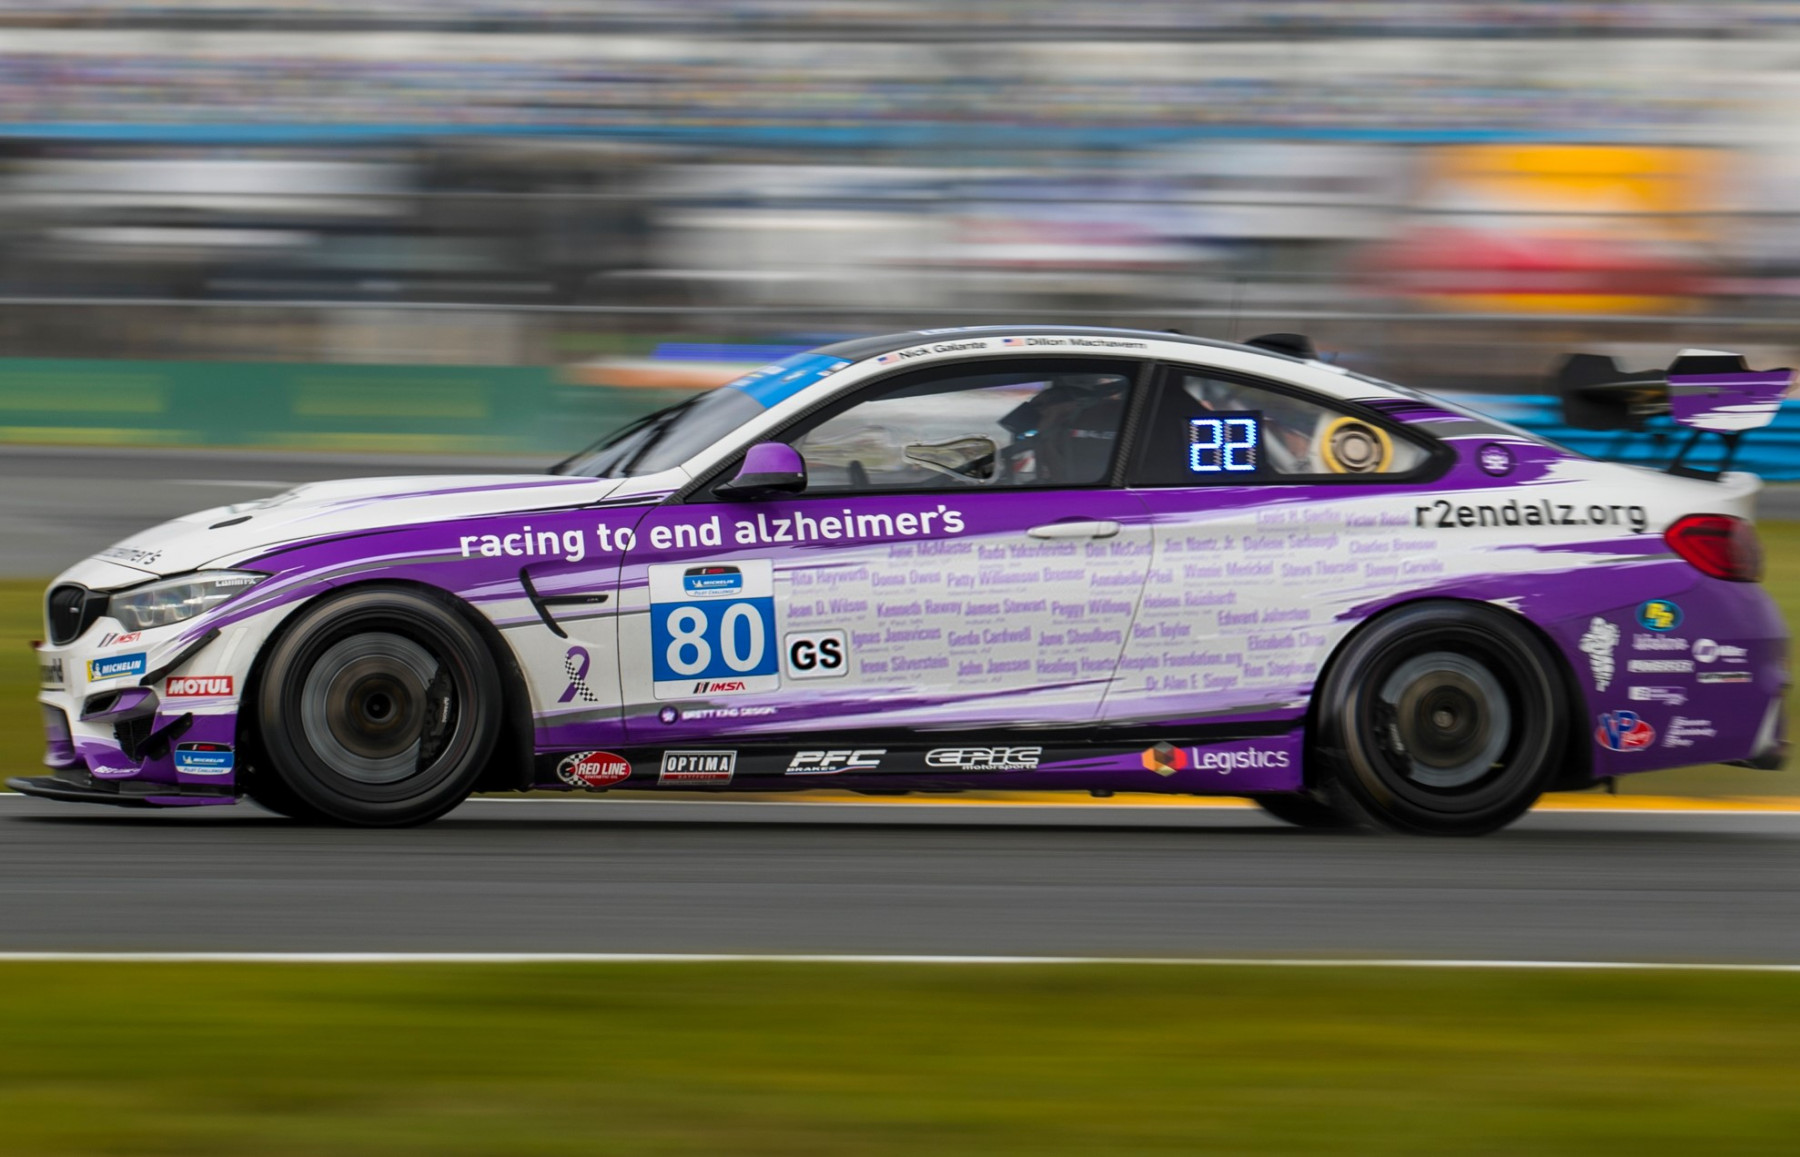 Racing to End Alzheimer's/alzheimersnewstoday.com/nonprofit uses race cars to raise awareness